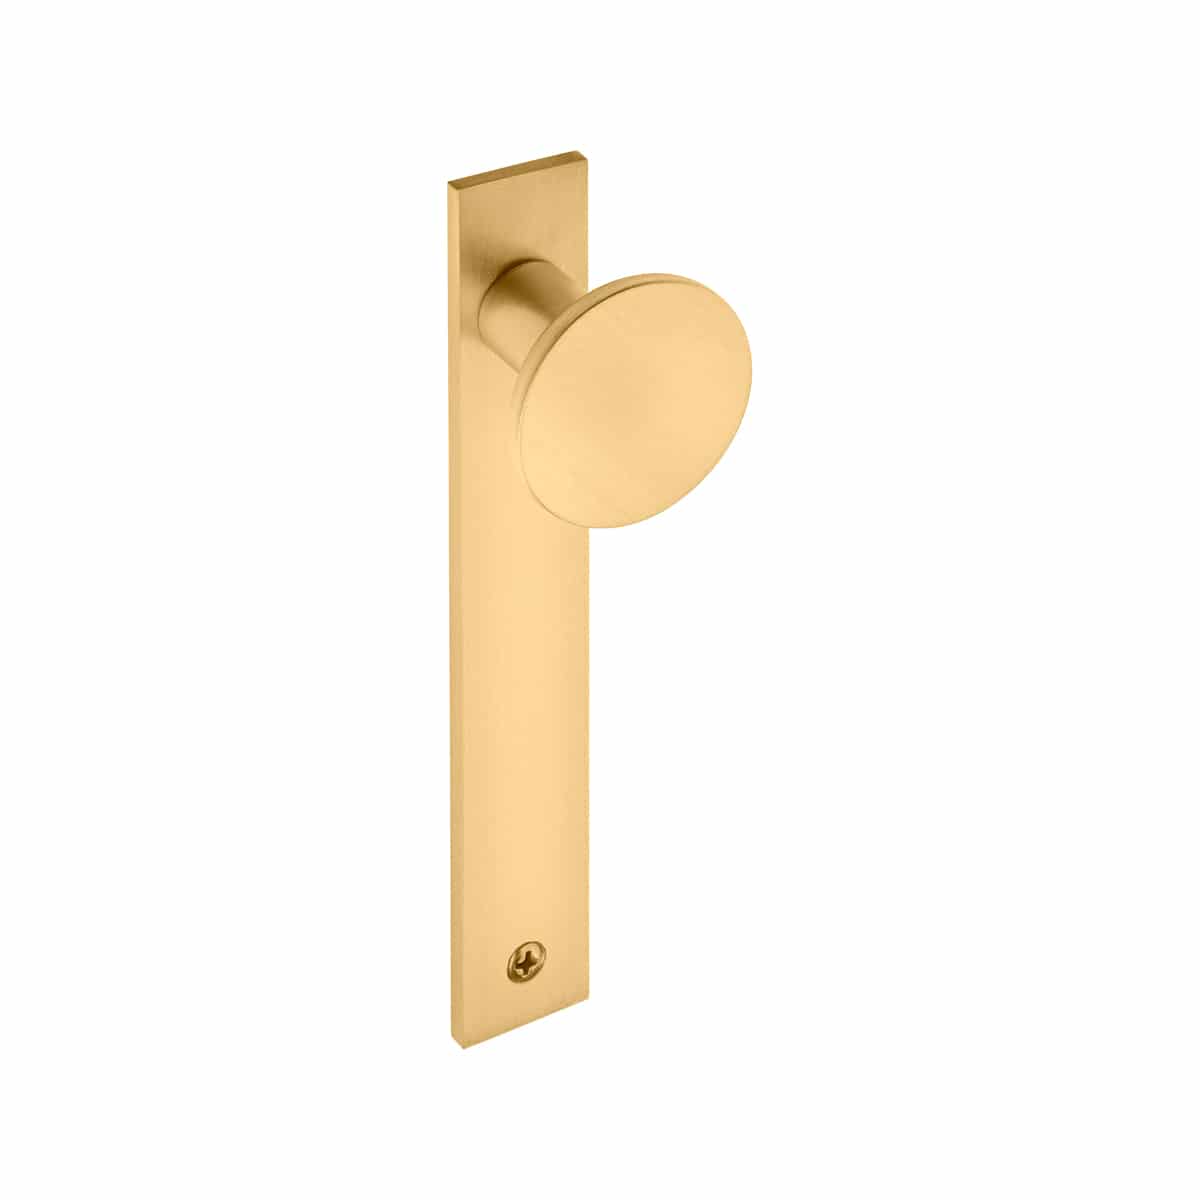 20mm Conical Knob On 130x20mm Plate Brass